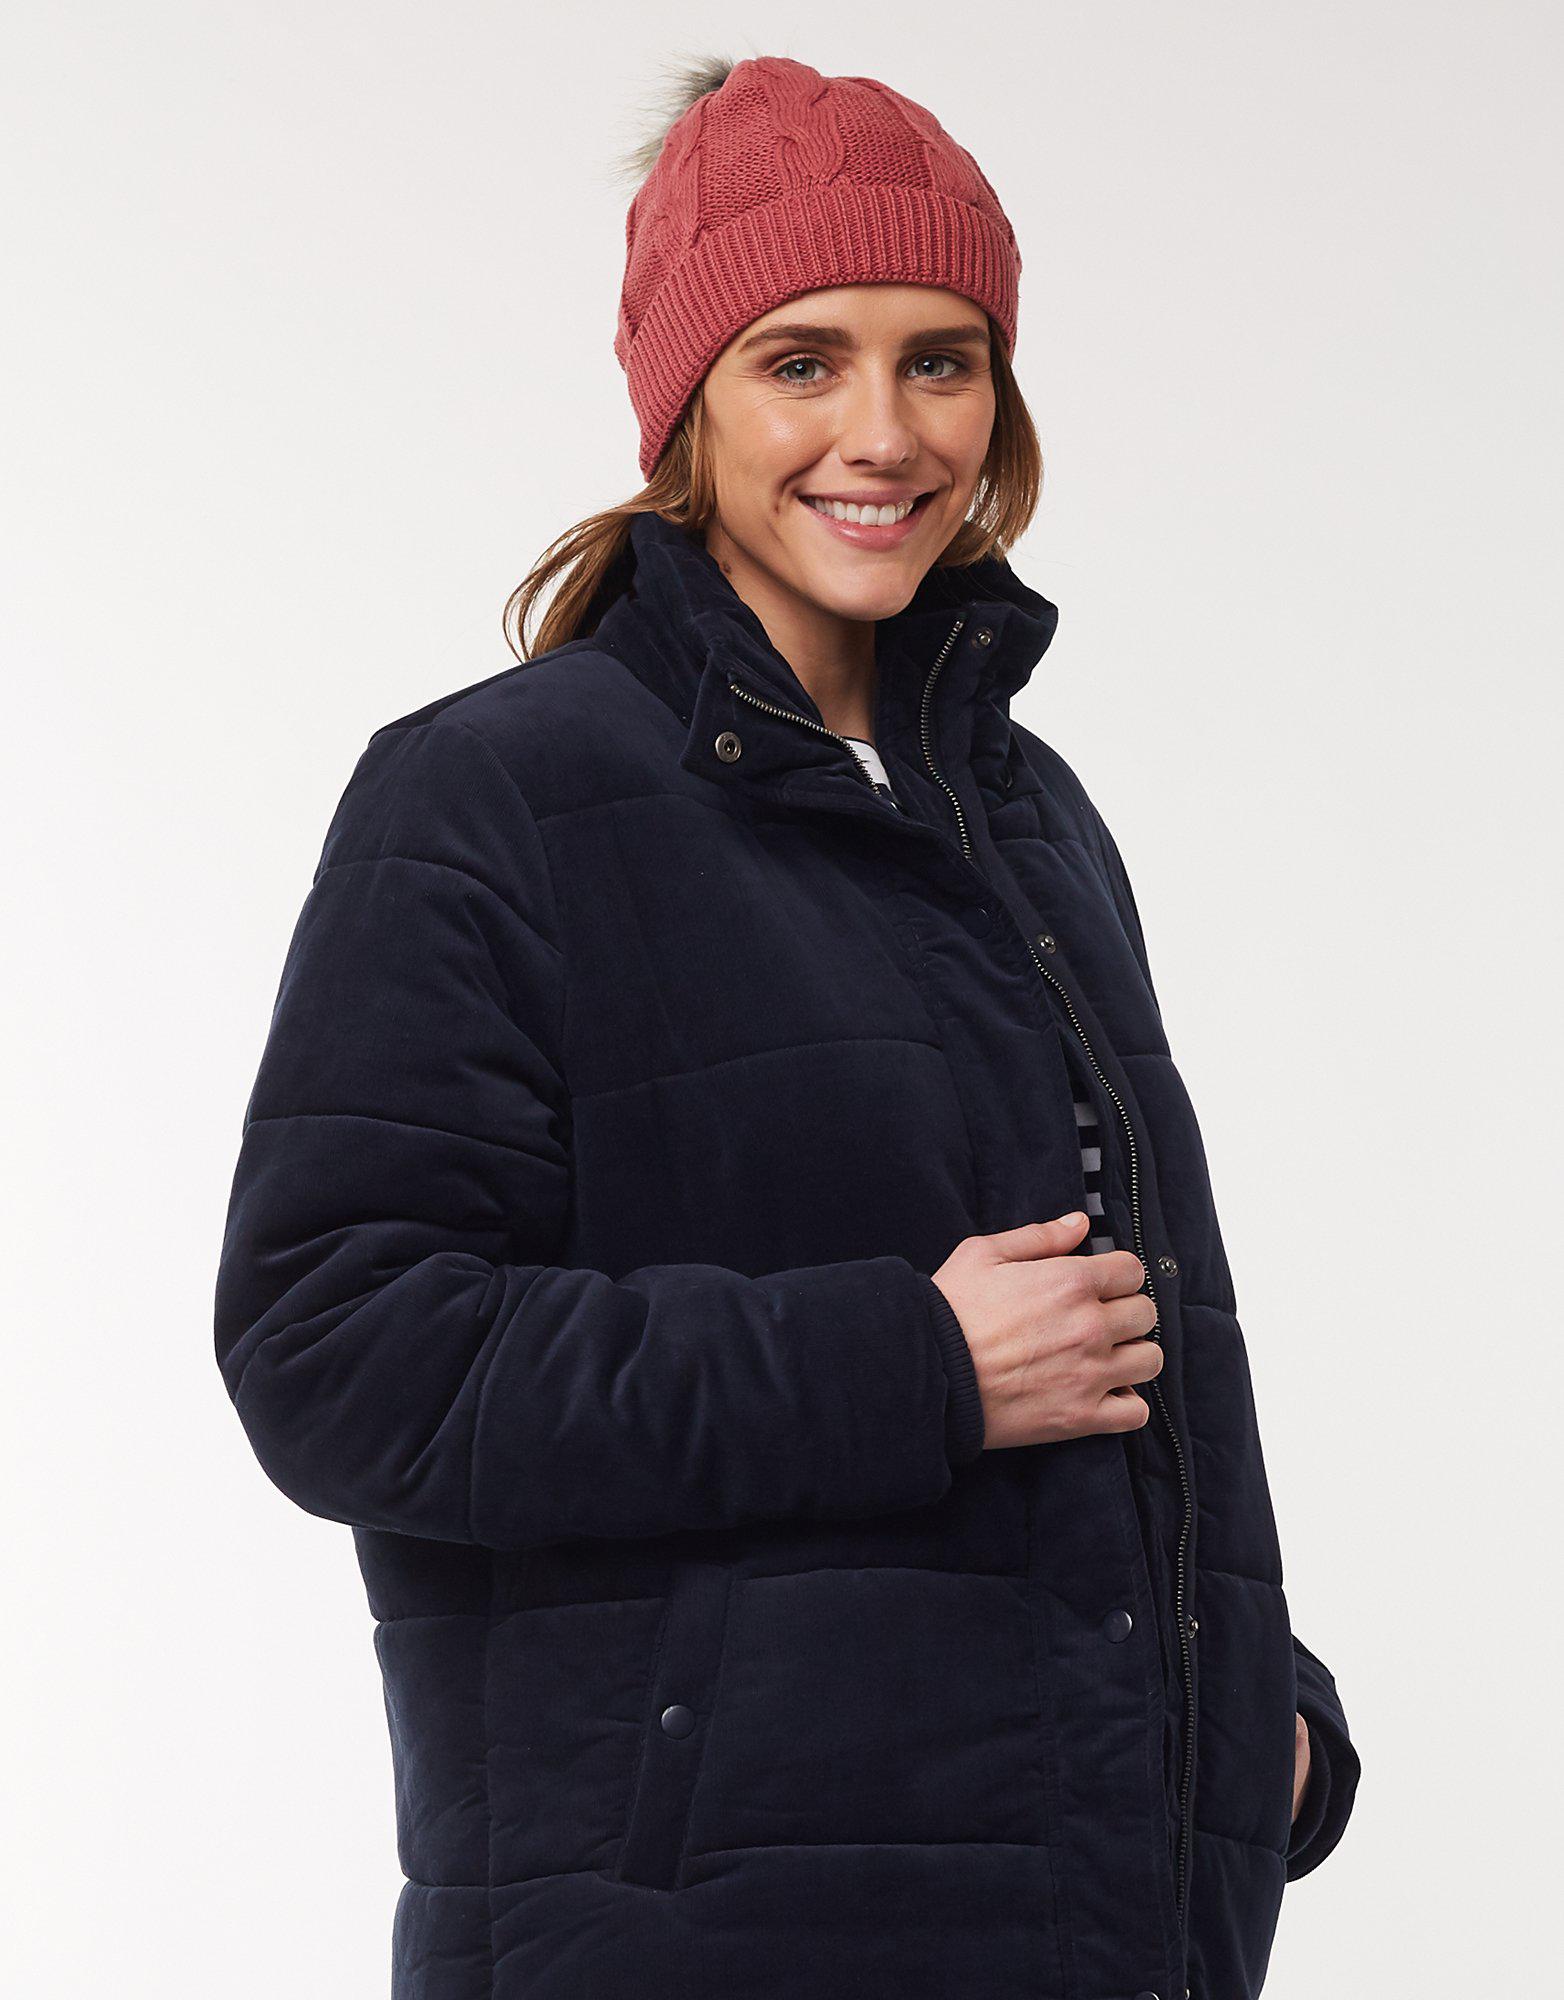 Carla Cable Beanie - Deep Rose - Elm Lifestyle - FUDGE Gifts Home Lifestyle